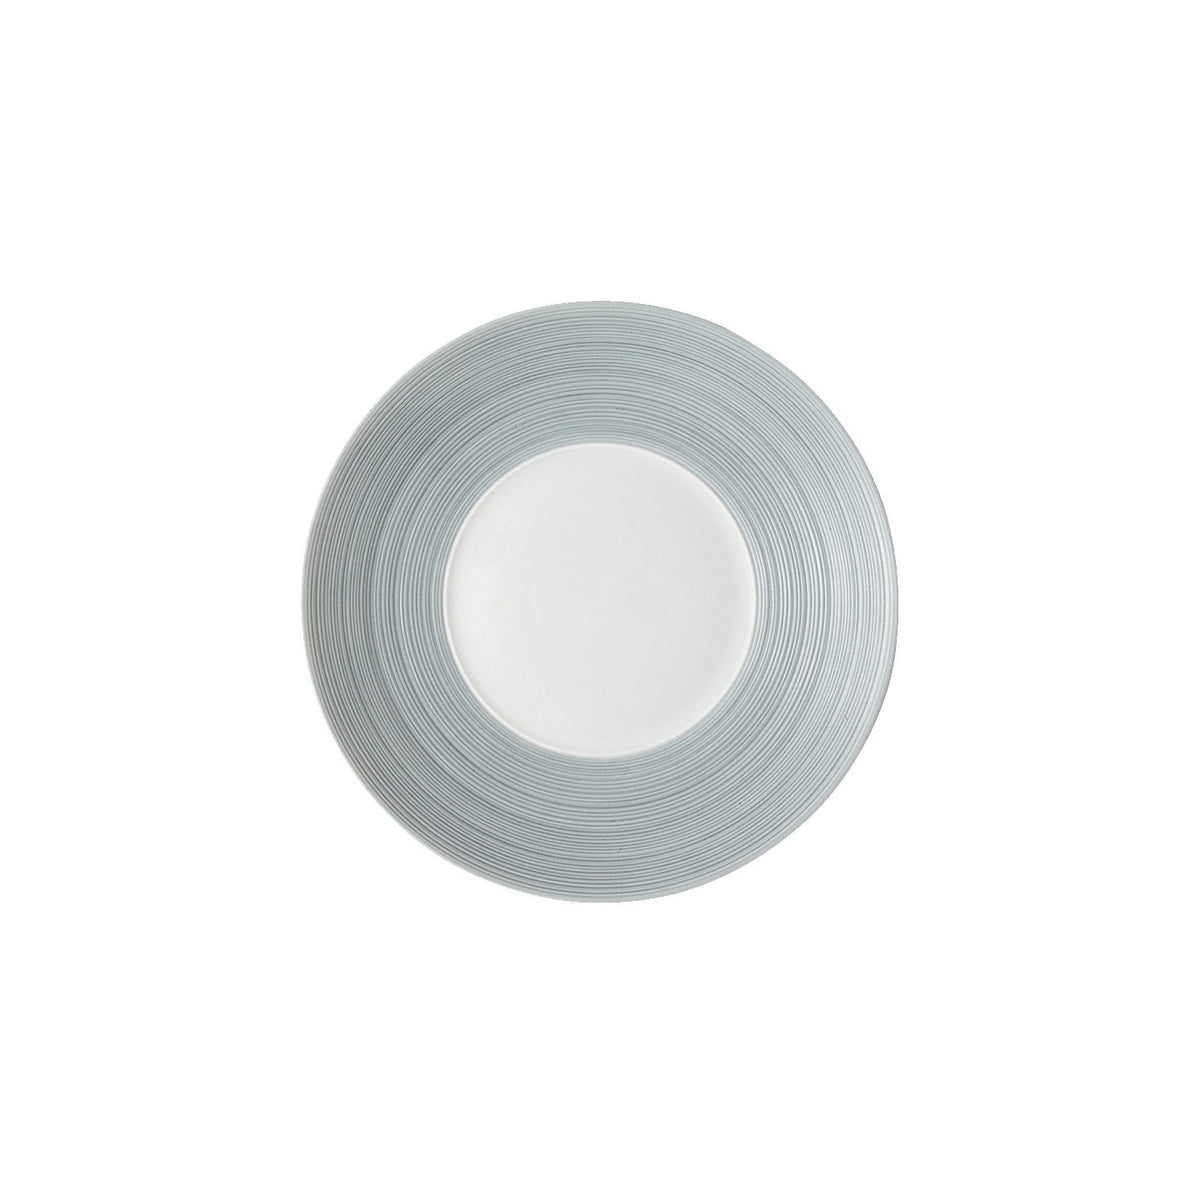 Hemisphere Bread and Butter Plate - Storm Blue